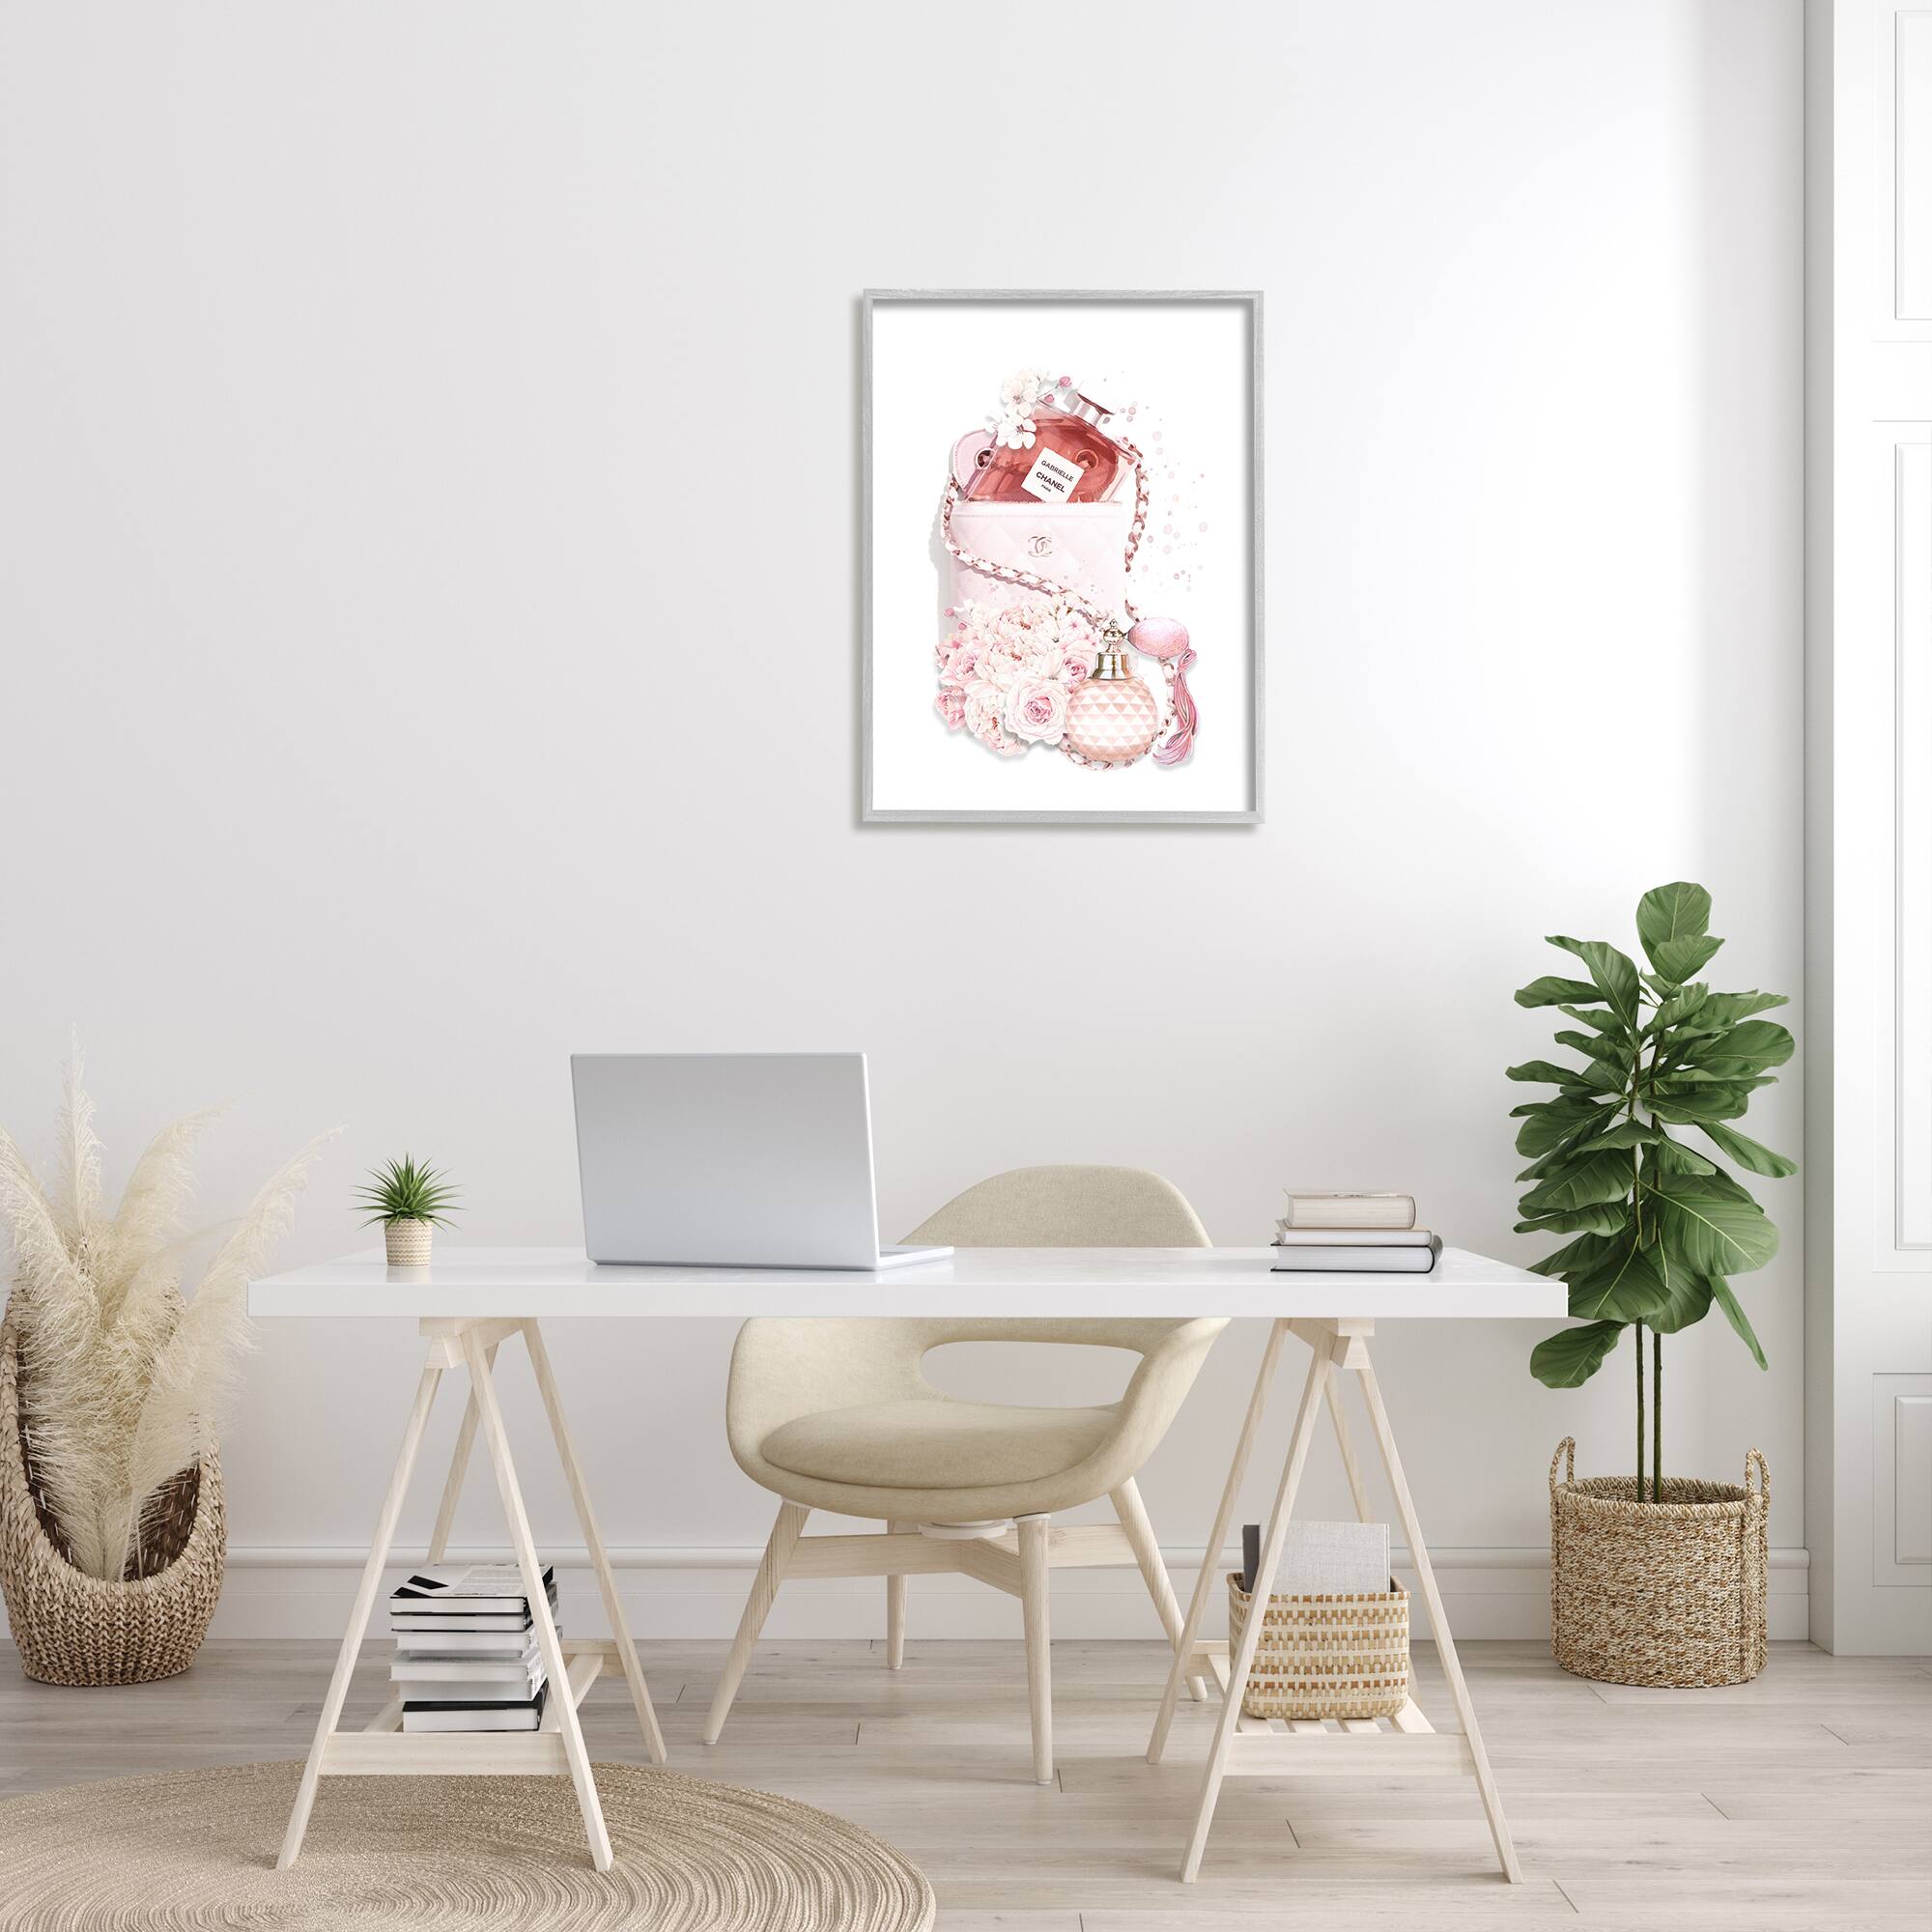 Stupell Industries Pink Designer Bag with Chic Florals Paint Splatter in Gray Frame Wall Art